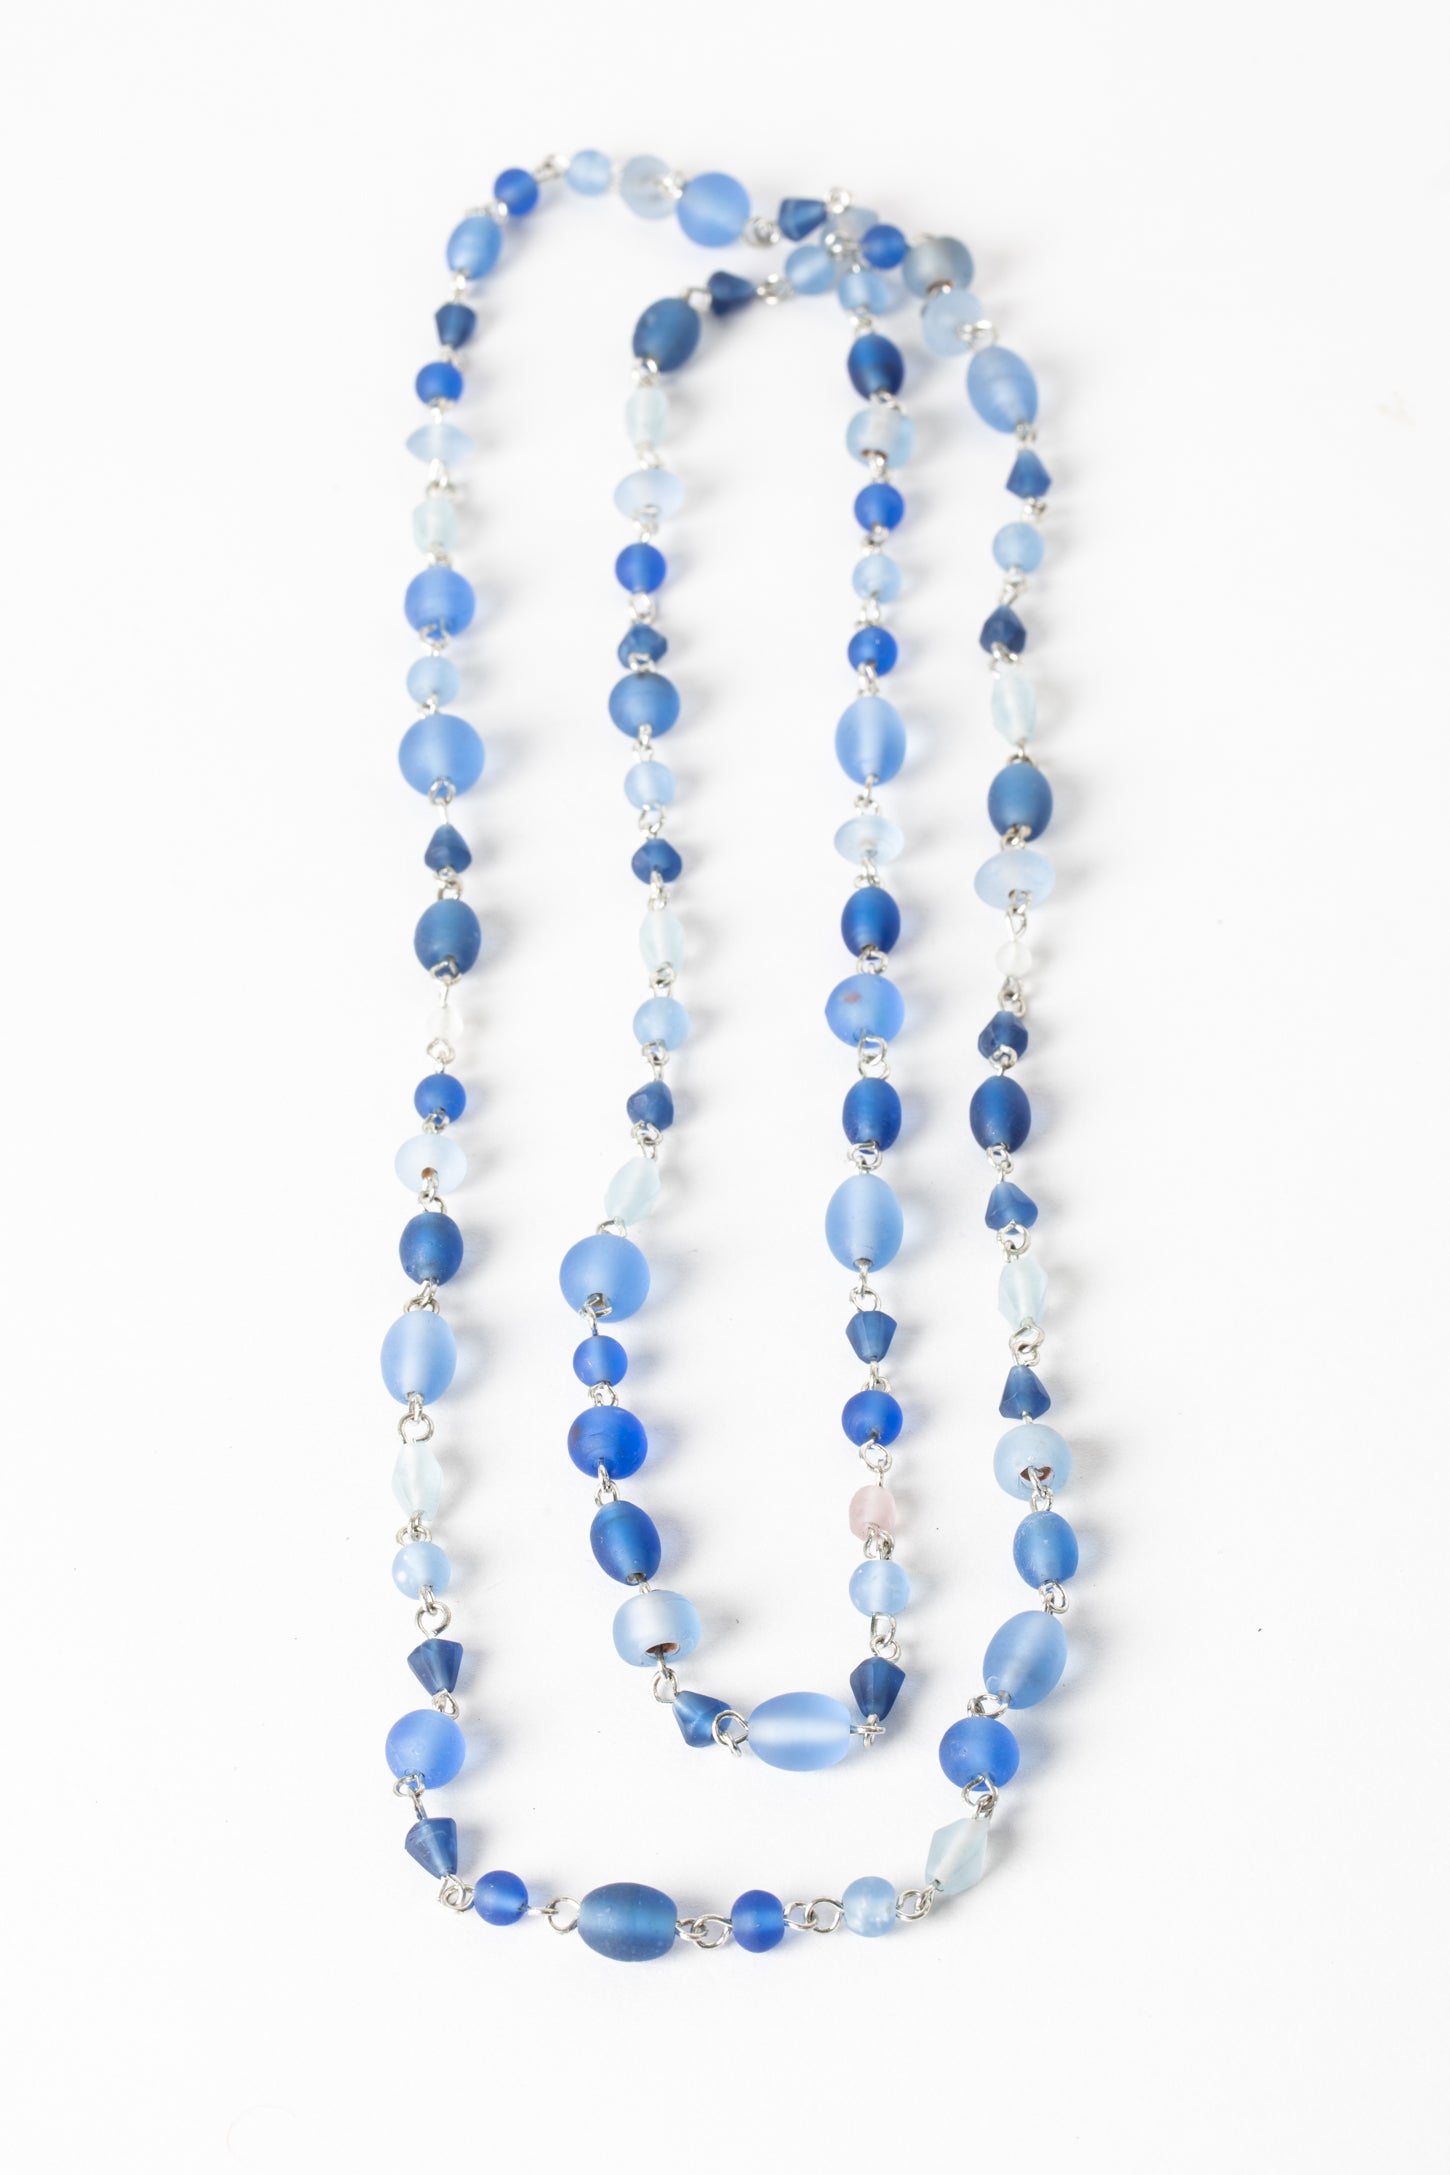 Buy Long Blue White Beaded Necklace Set at Amazon.in